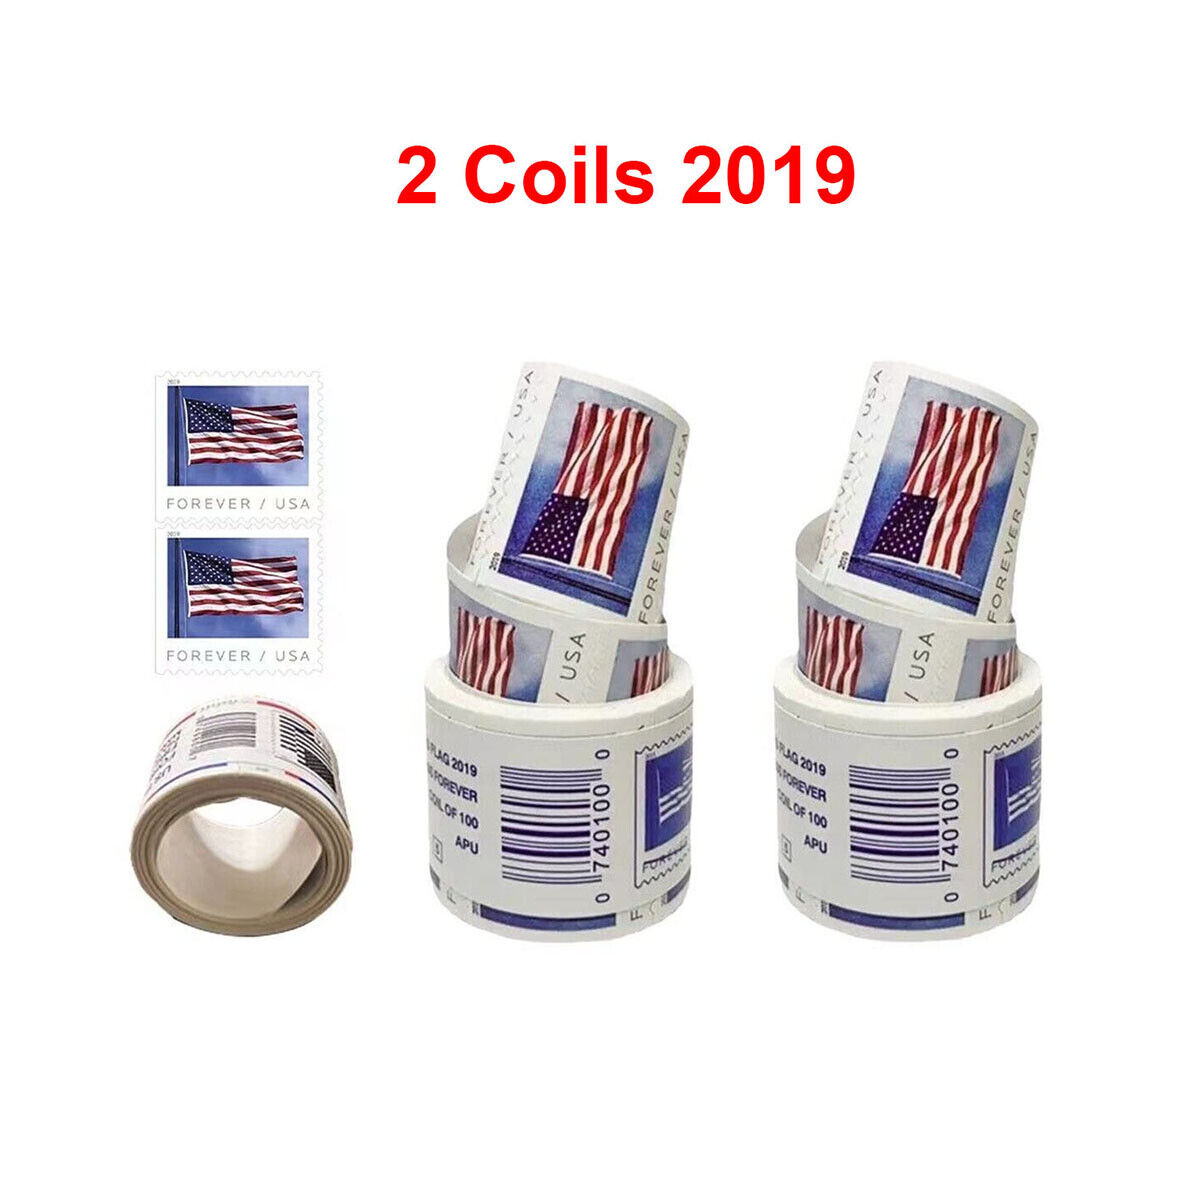 2 Coils of 2019, Totally 200pcs with White Dispenser Fast ！！TOP